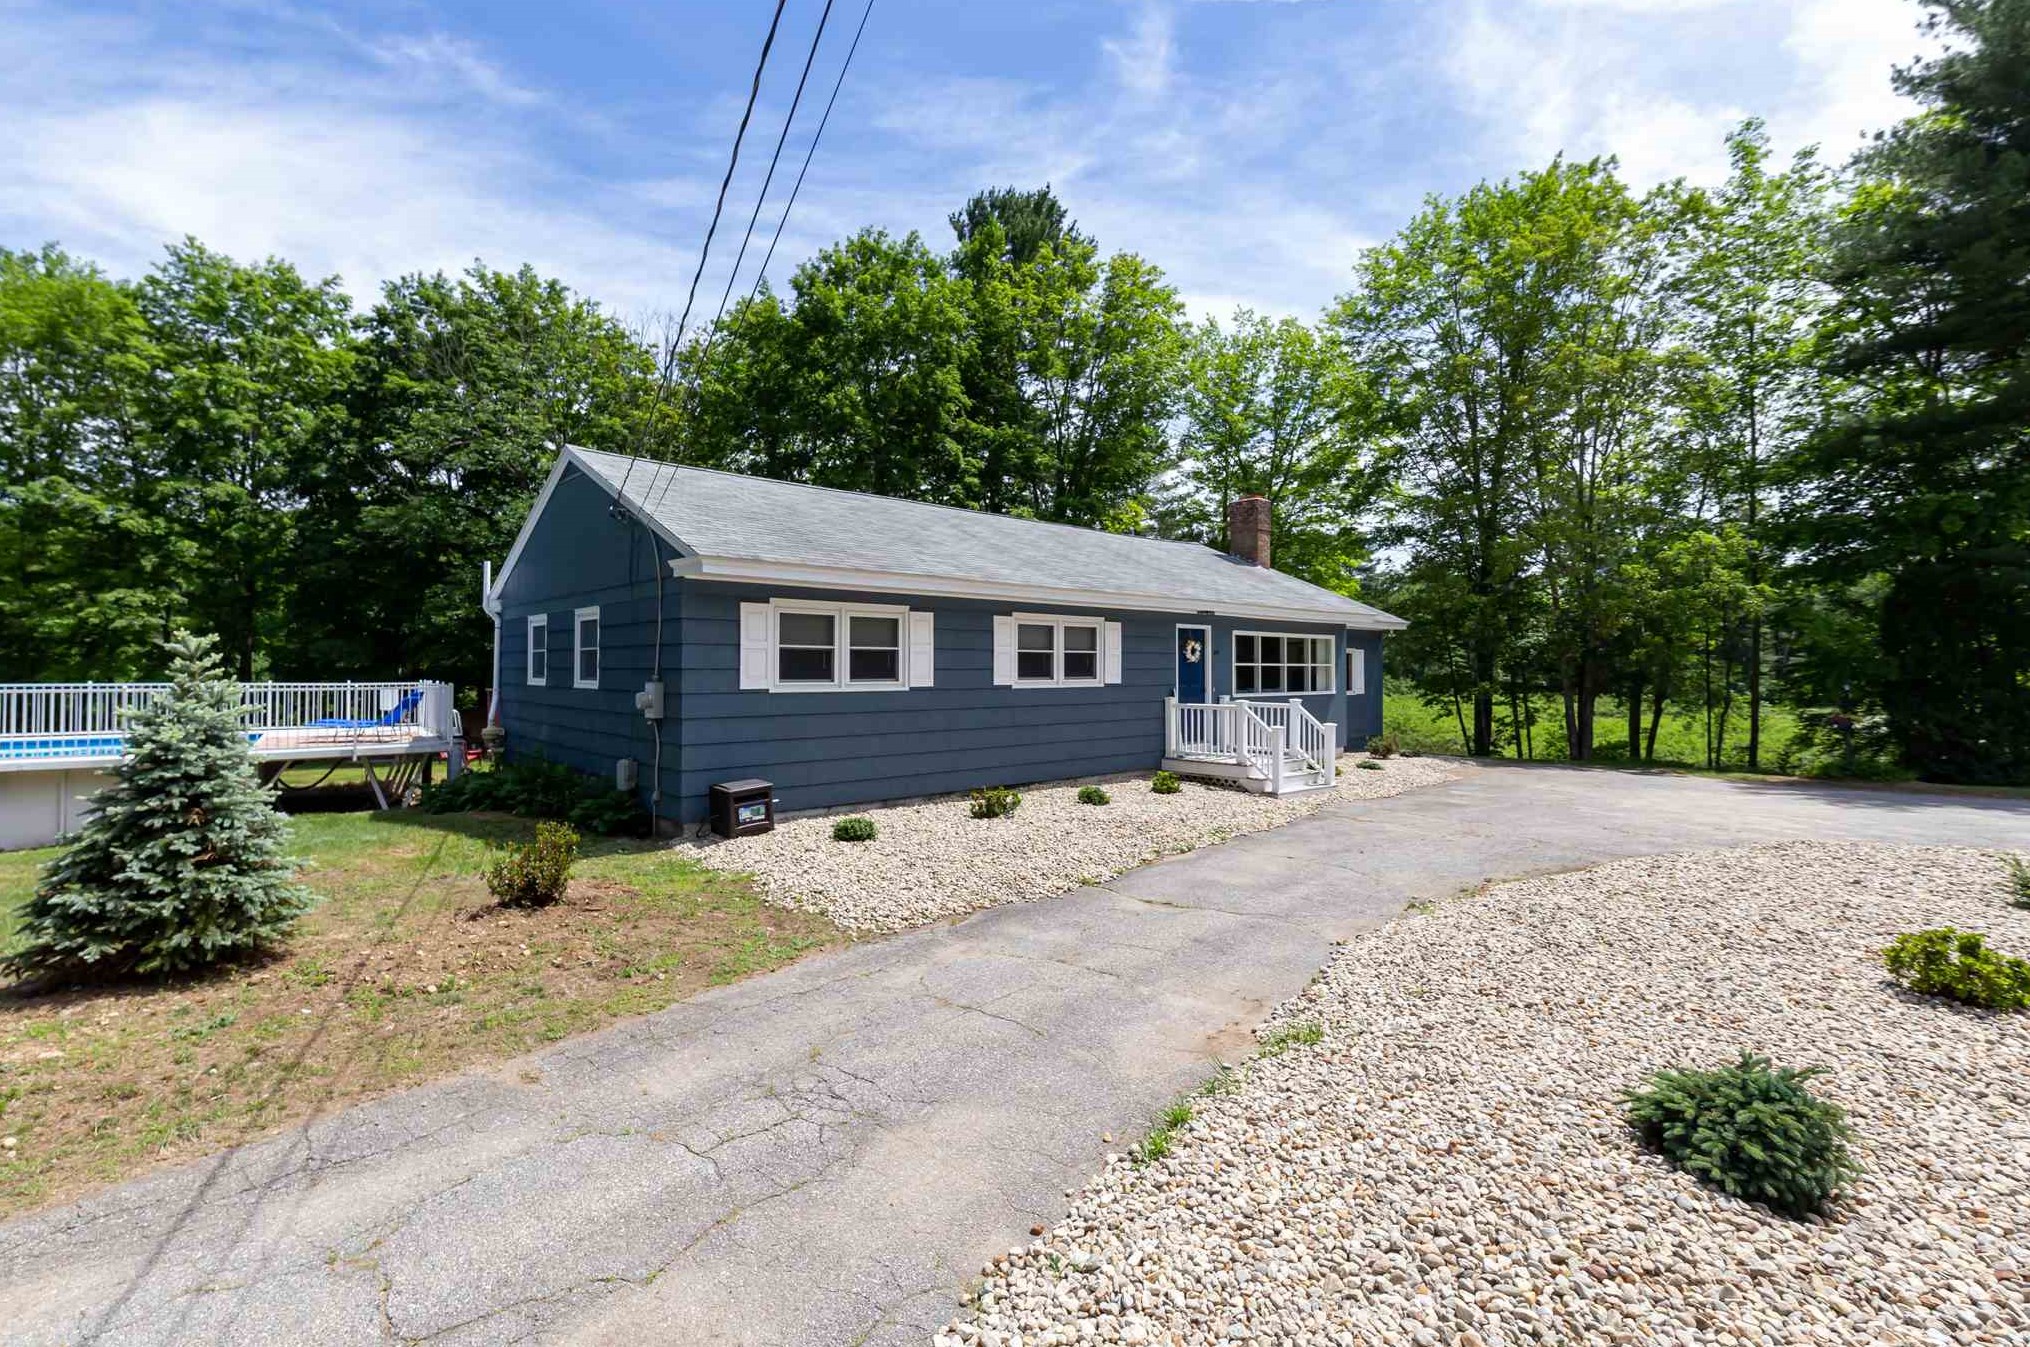 69 Lowell Rd, Windham, NH 03087-1811